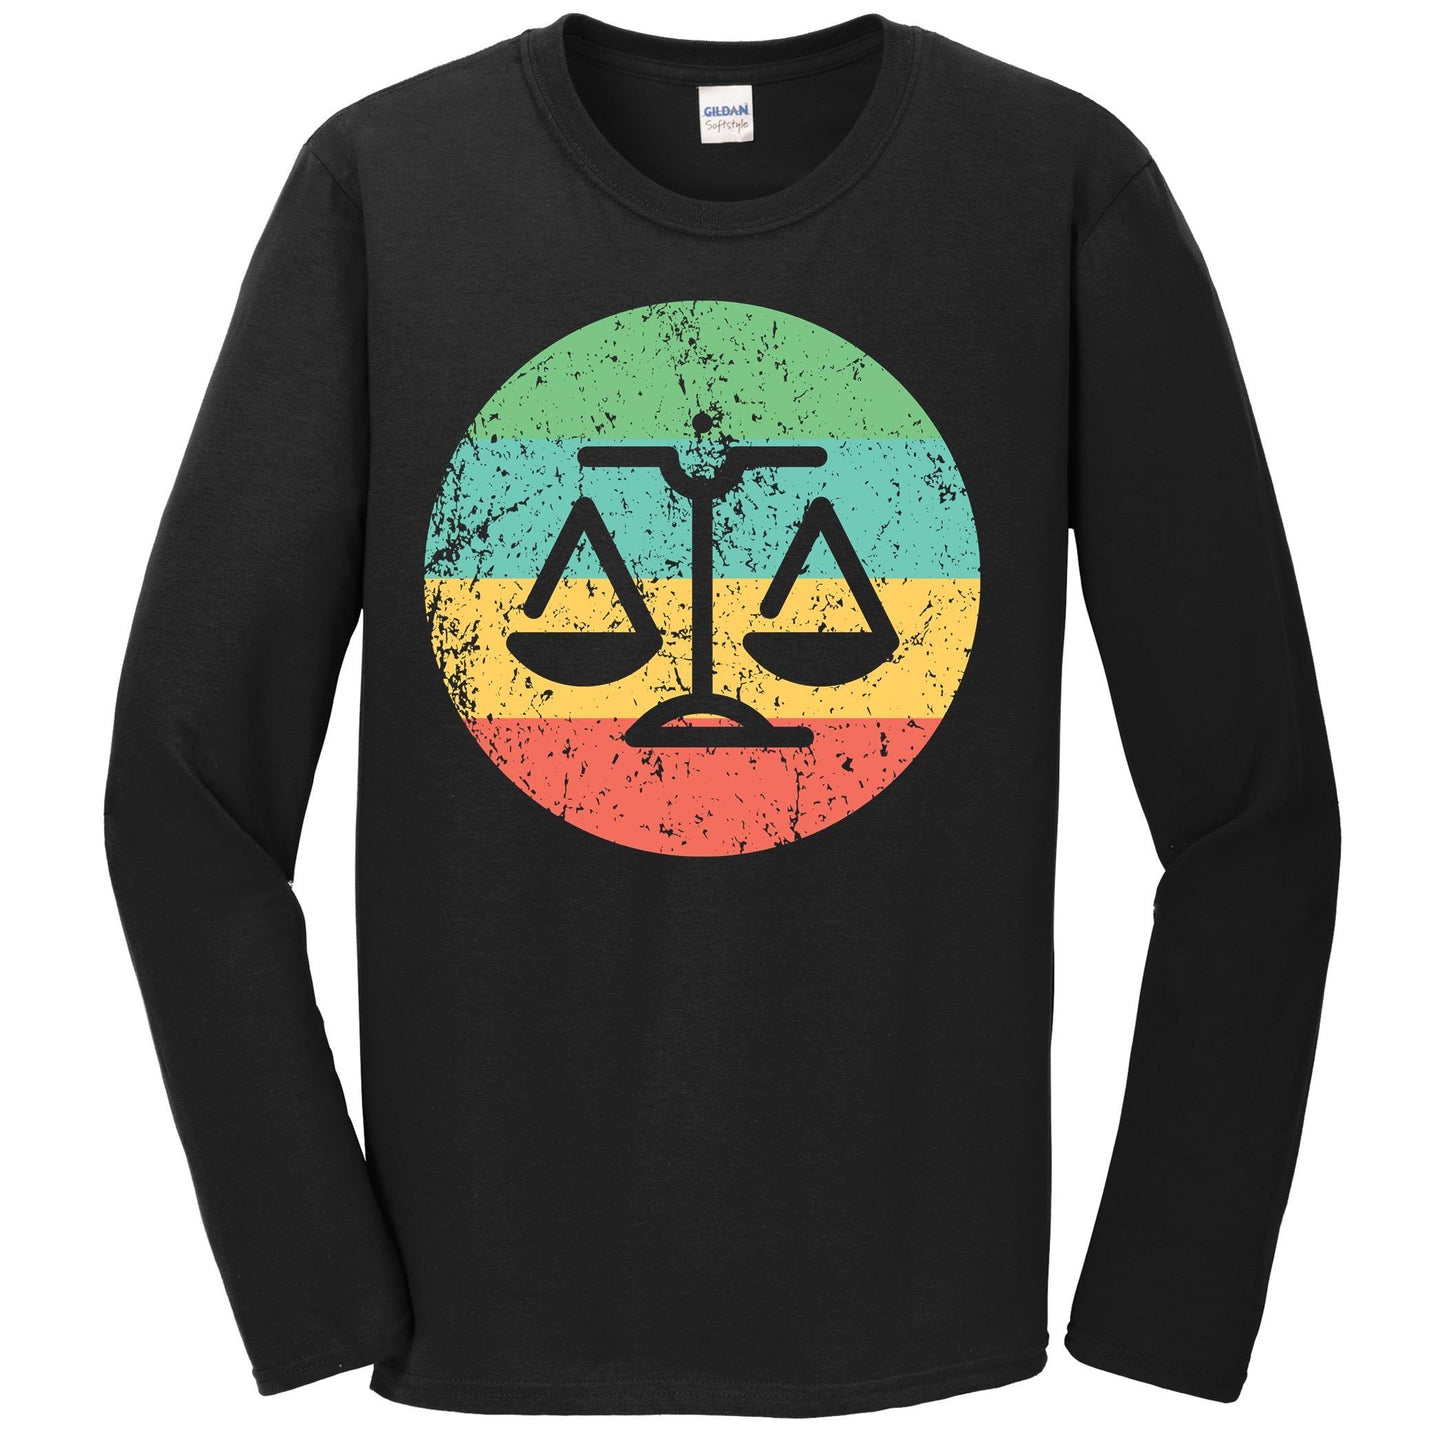 Lawyer Judge Long Sleeve Shirt - Retro Scale of Justice T-Shirt